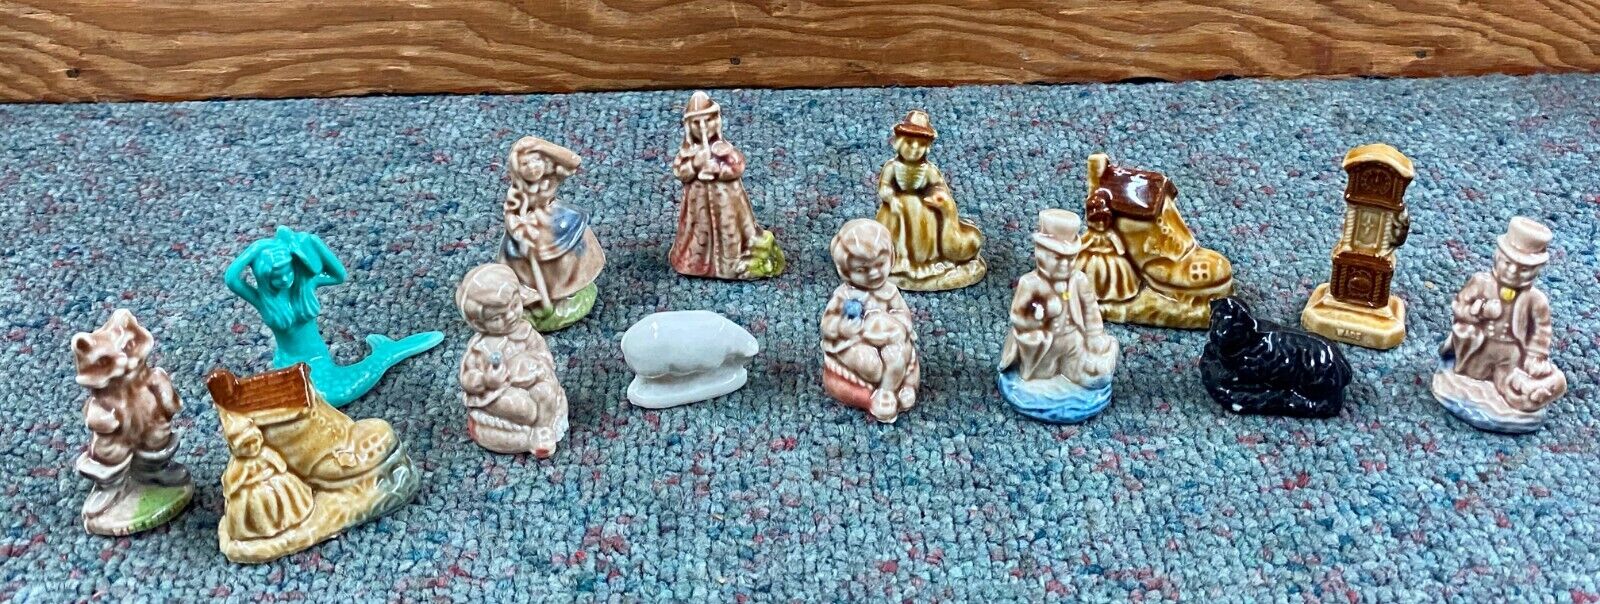 Lot of 14 WADE Whimsies Red Rose Tea Figurines